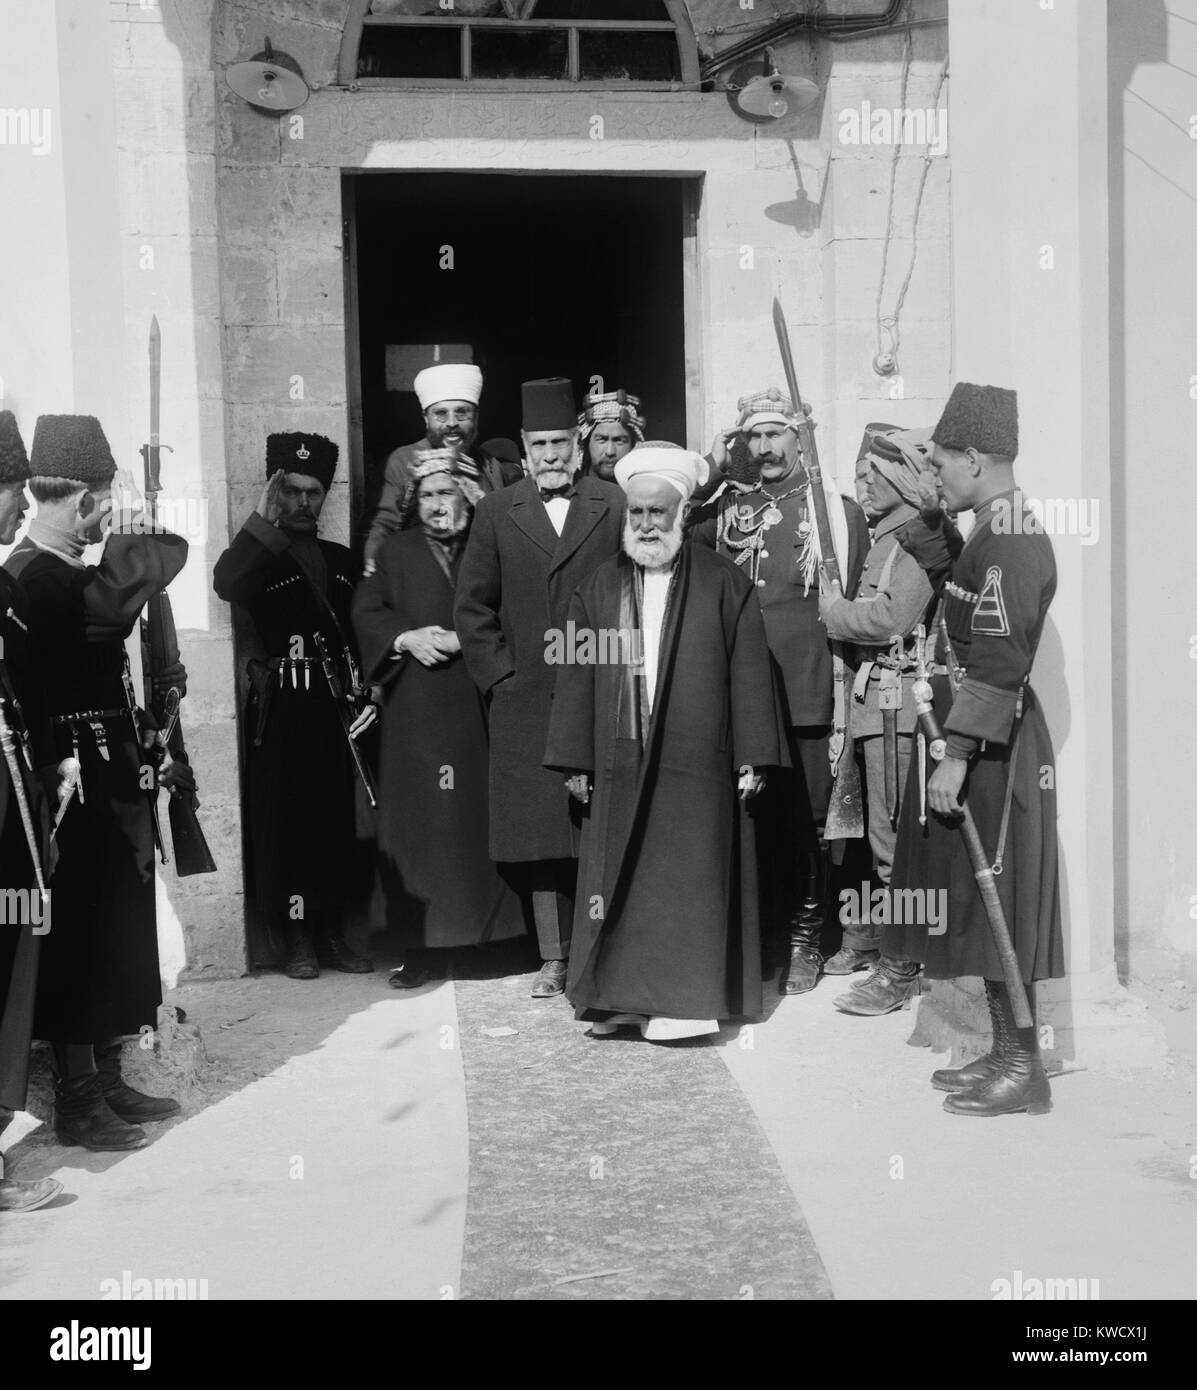 Hussein bin Ali, Sharif of Mecca, leads a group from a doorway, in Amman, Trans-Jordan, 1921. Two of his sons, Abdullah and Faisal, became the Emirs of British Mandates, Trans-Jordan and Iraq (BSLOC 2017 1 92) Stock Photo